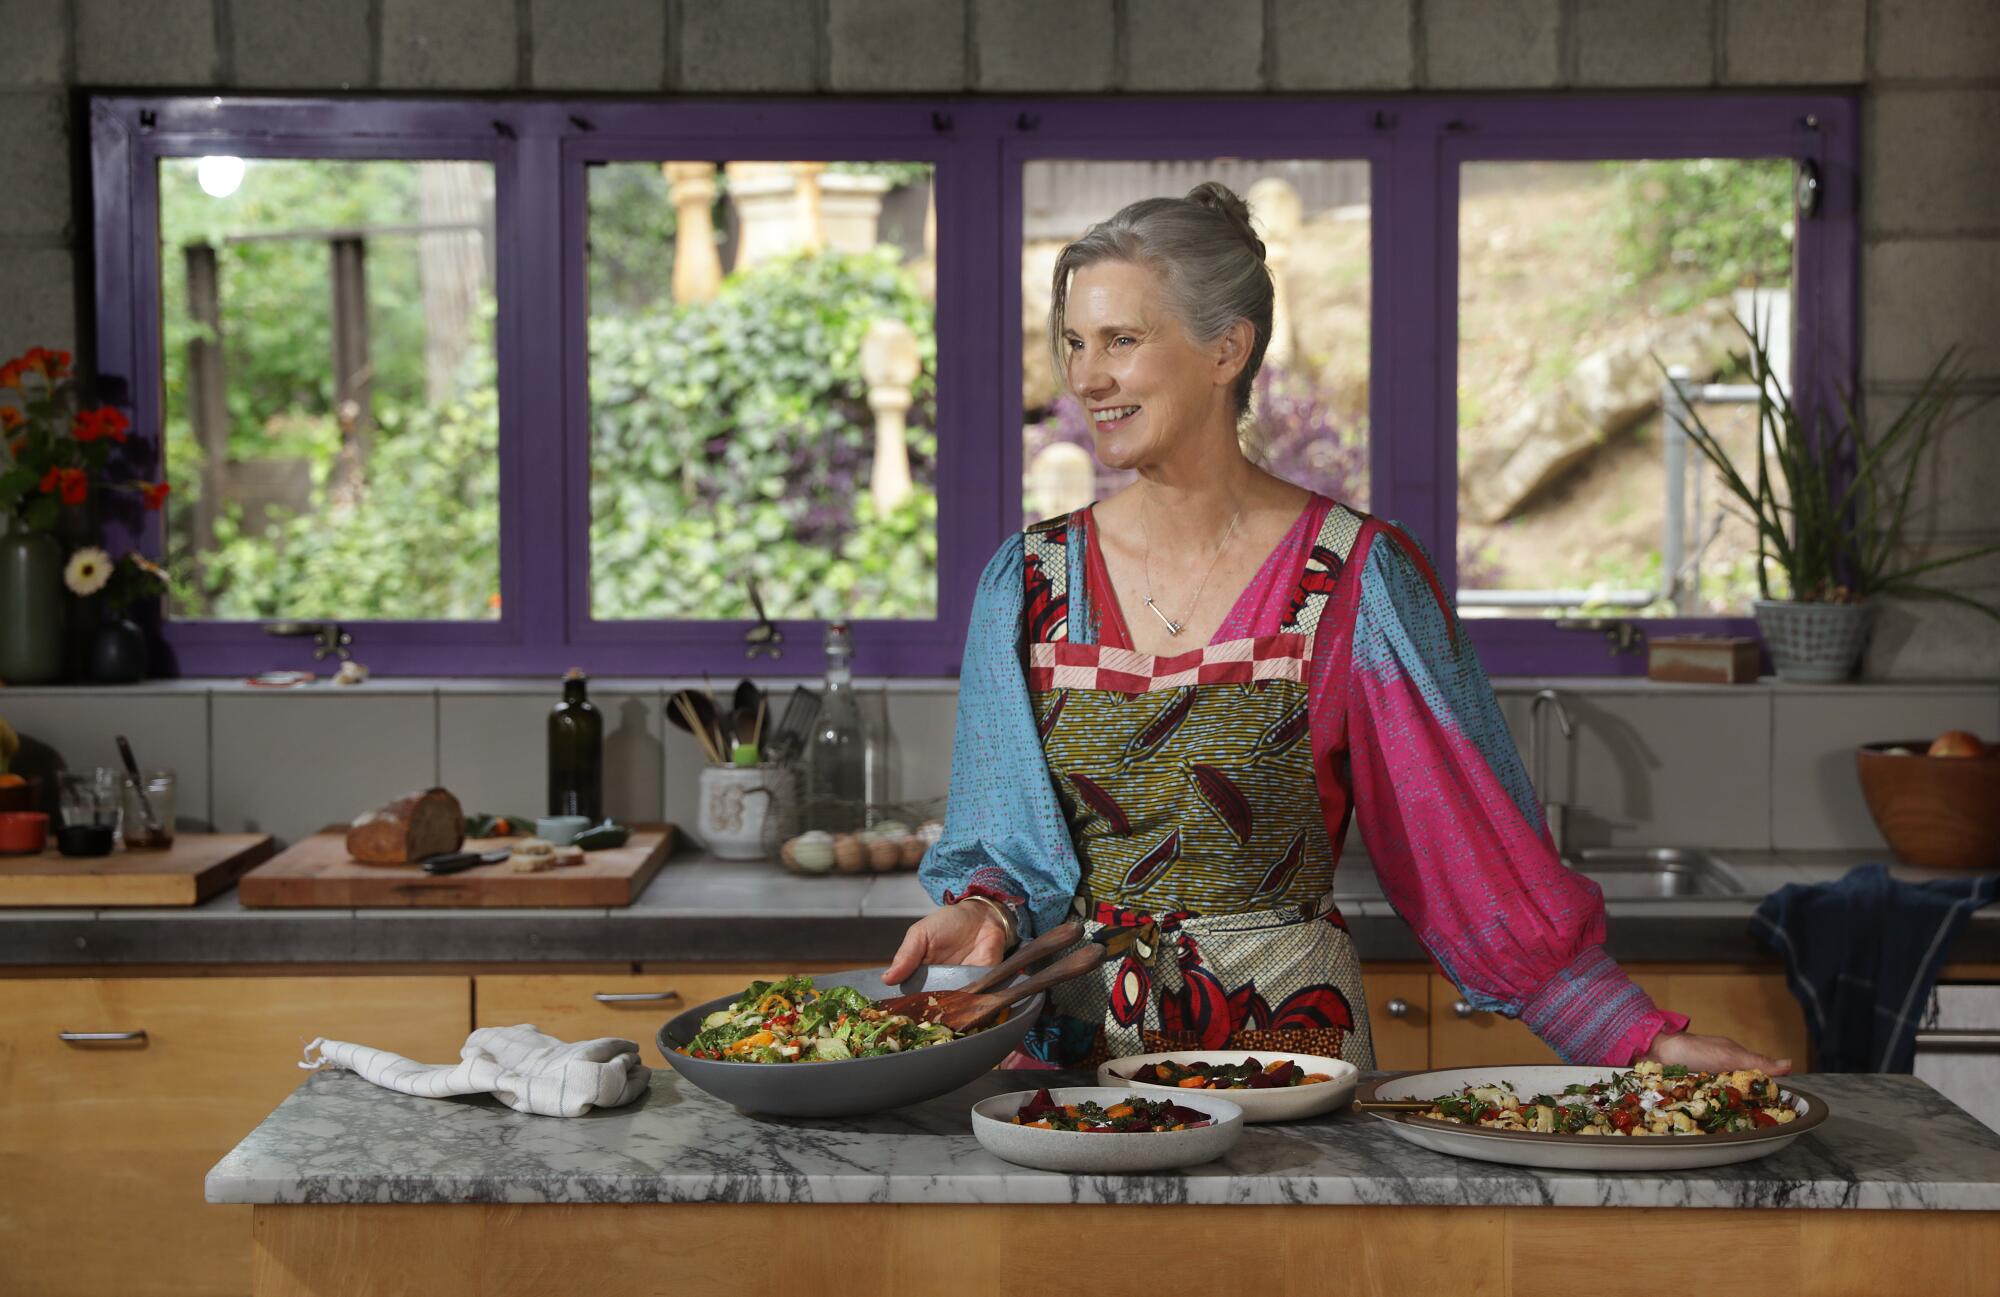 A woman stands in a kitchen, windows behind and salads in big bowls on the counter in front of her